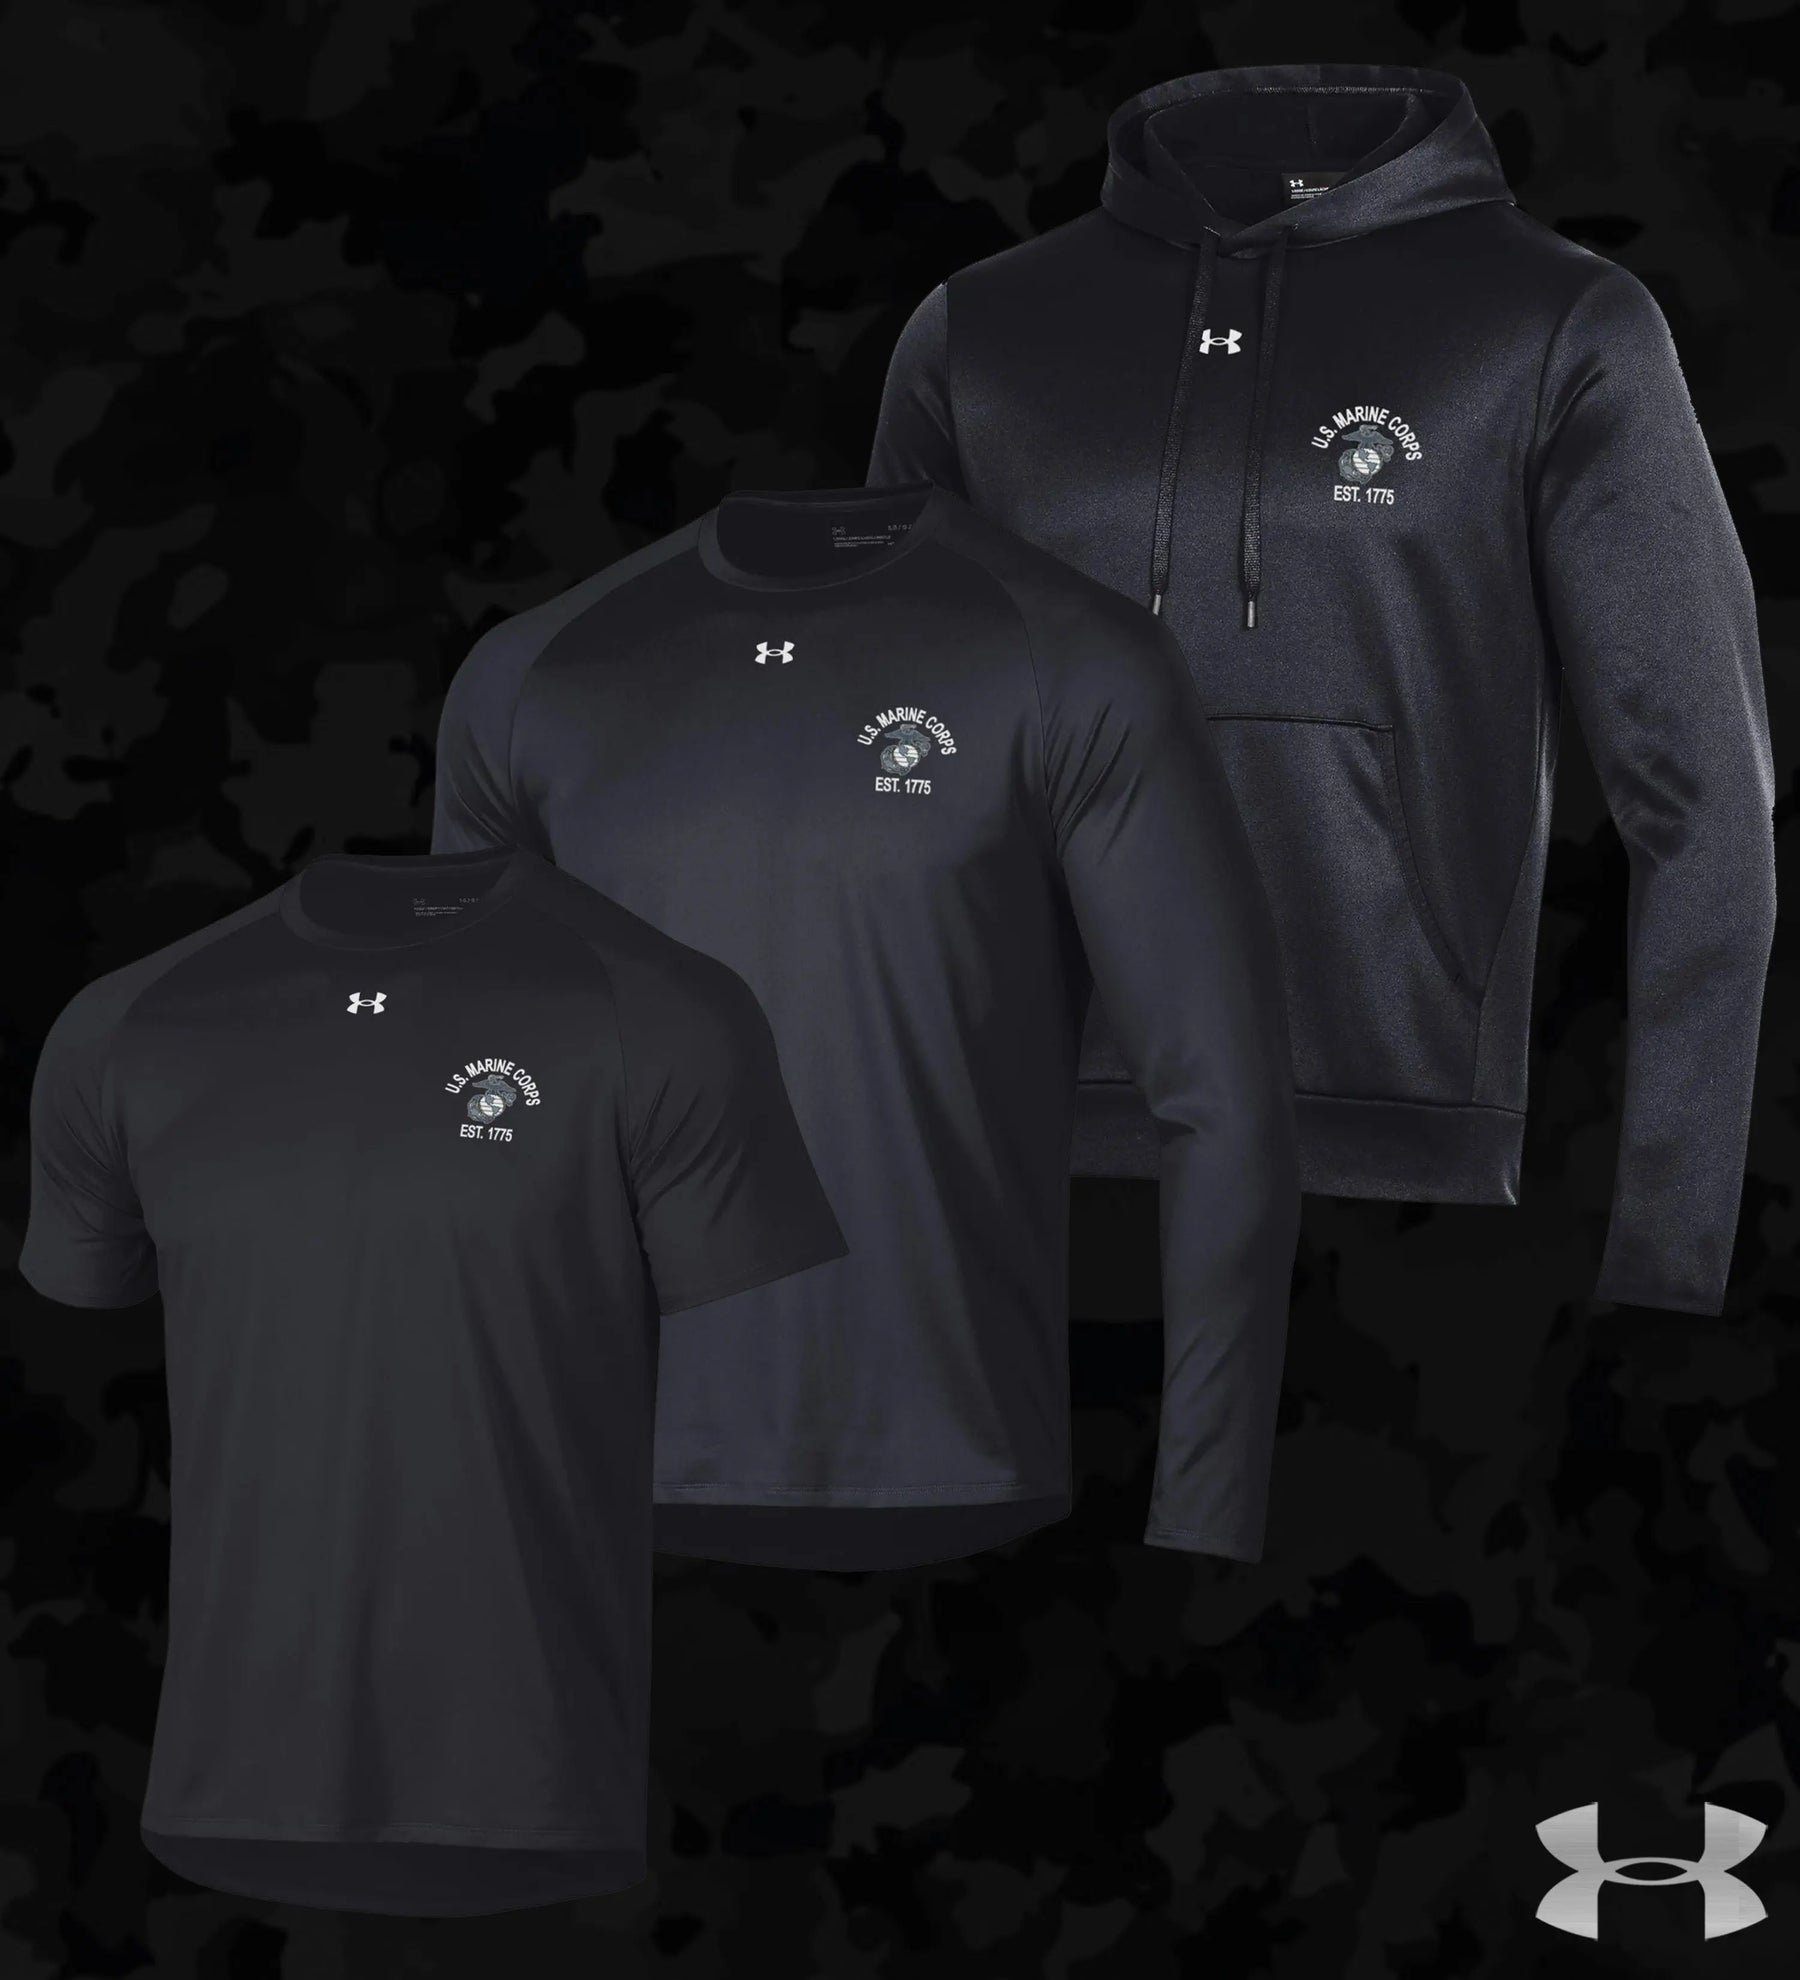 Closeout Under Armour EST. 1775 Chest Seal Tech Performance Long Sleeve Tee